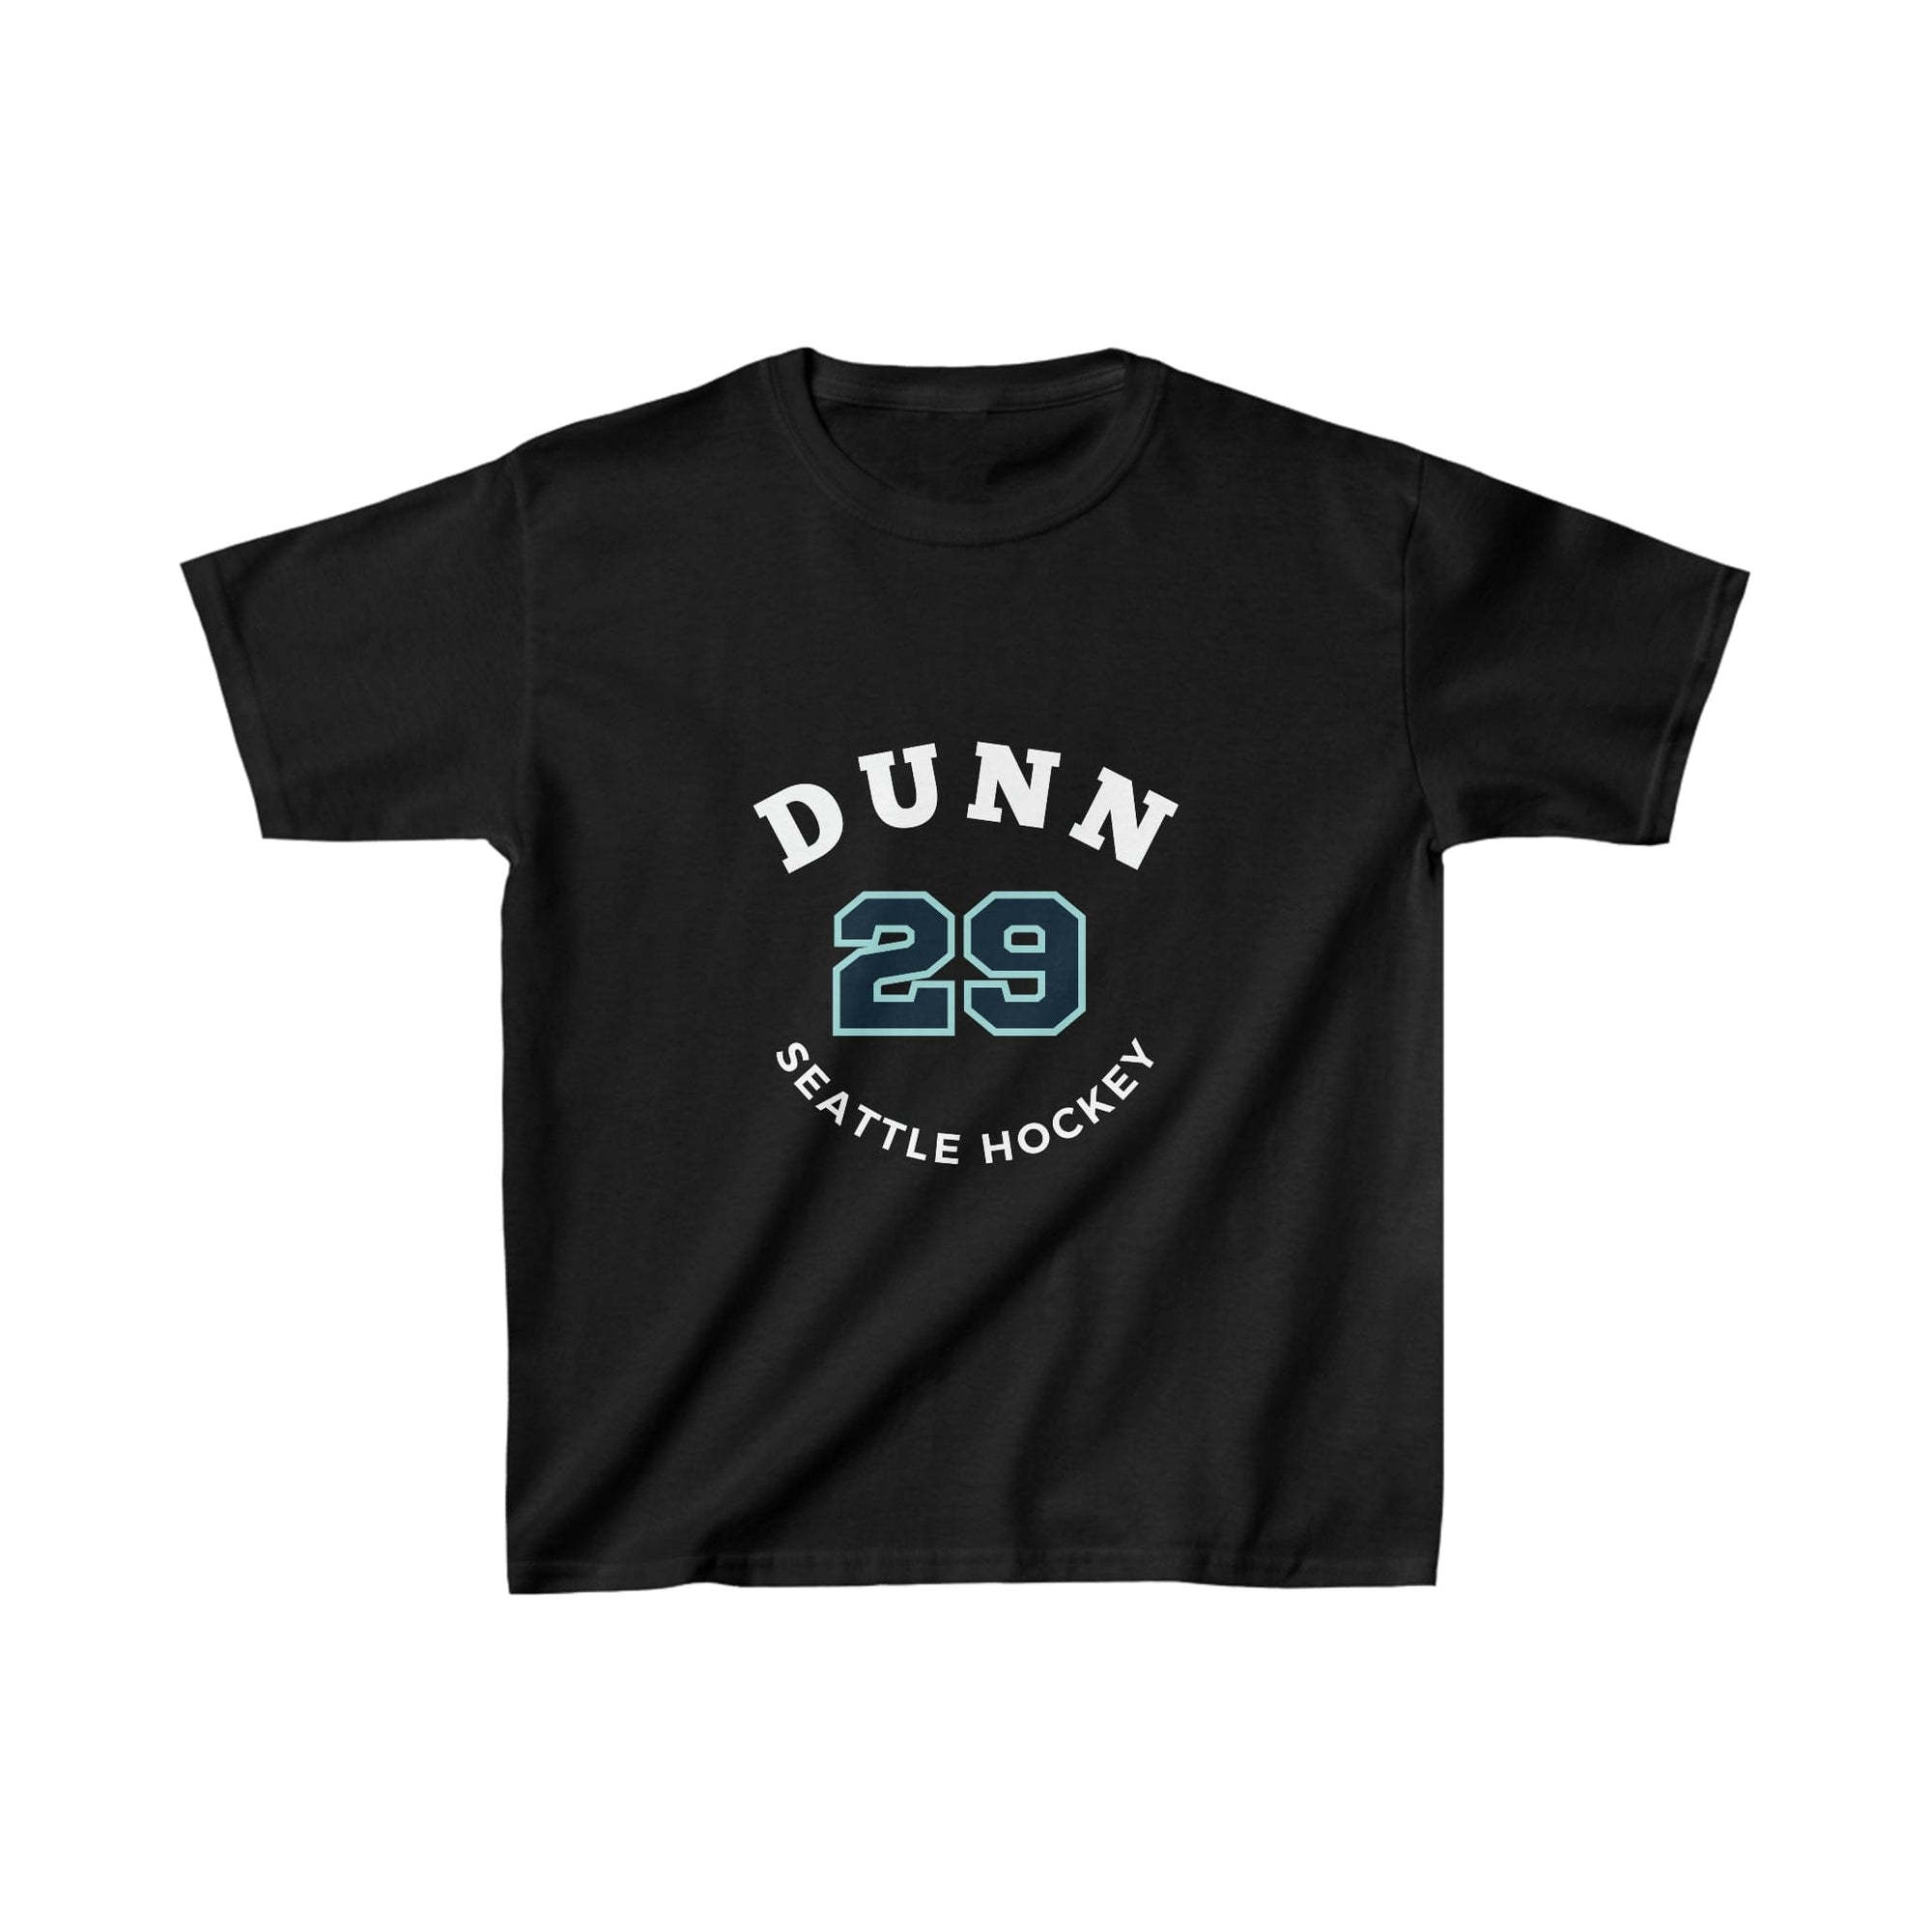 Kids clothes Dunn 29 Seattle Hockey Number Arch Design Kids Tee